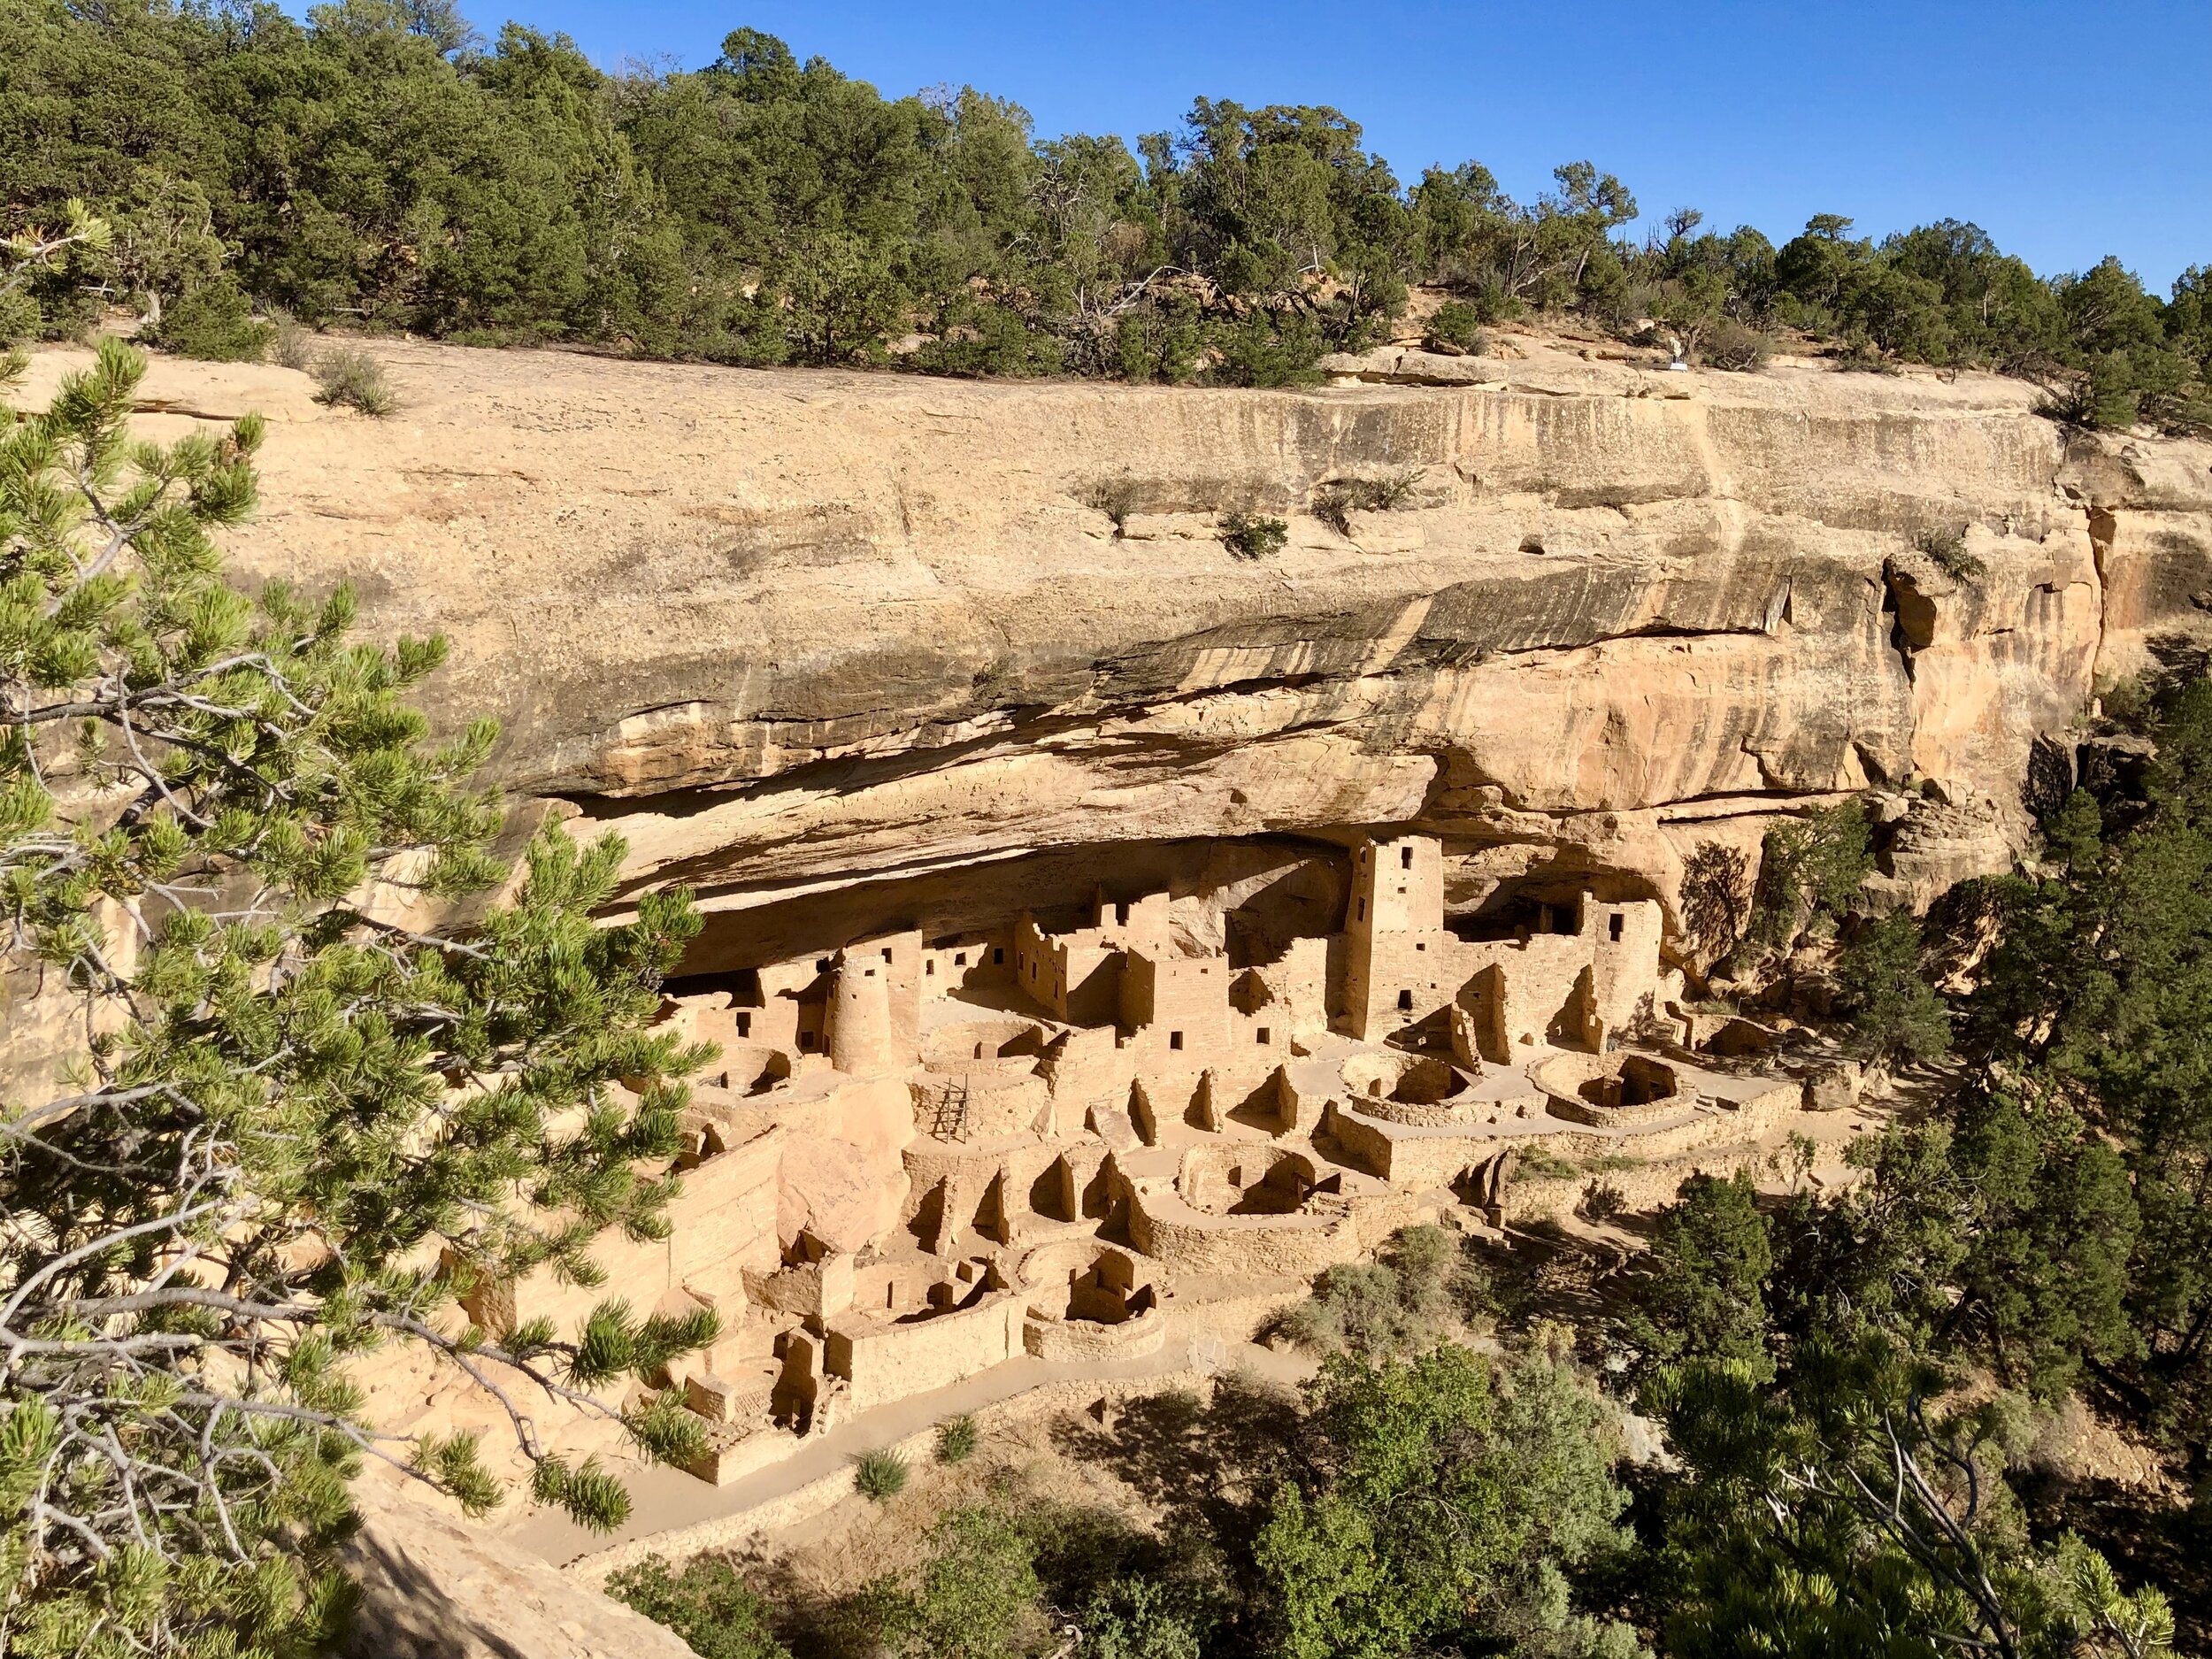 With more than one hundred rooms, Cliff Palace is the largest cliff dwelling in the park.